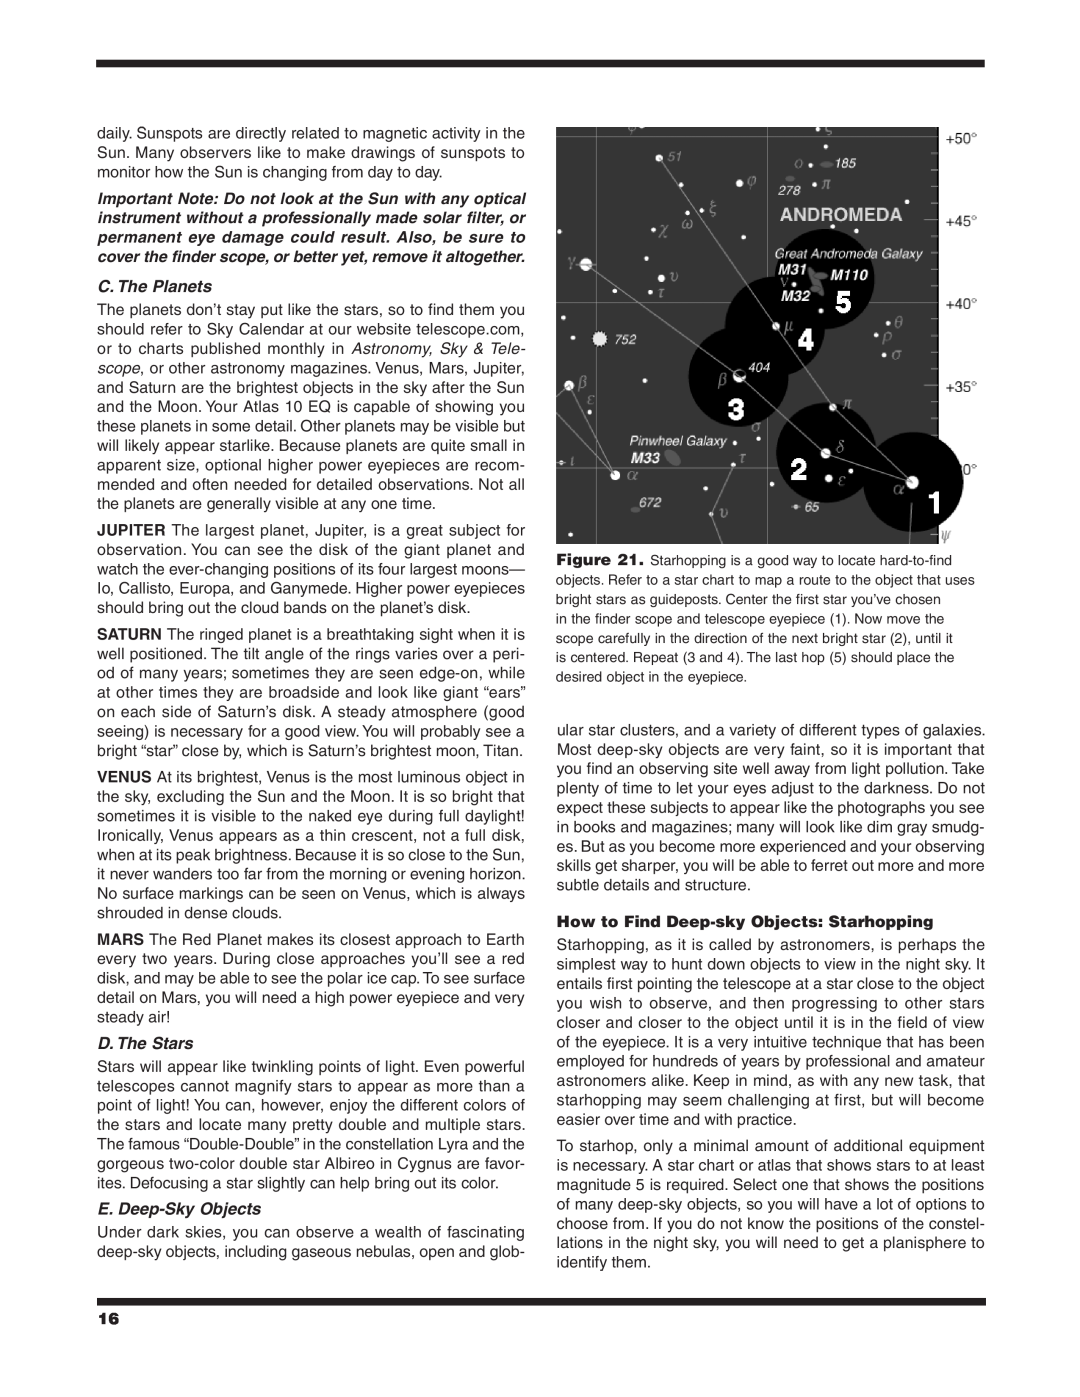 Orion 9874 instruction manual C. The Planets, D. The Stars, E. Deep-Sky Objects, How to Find Deep-sky Objects Starhopping 